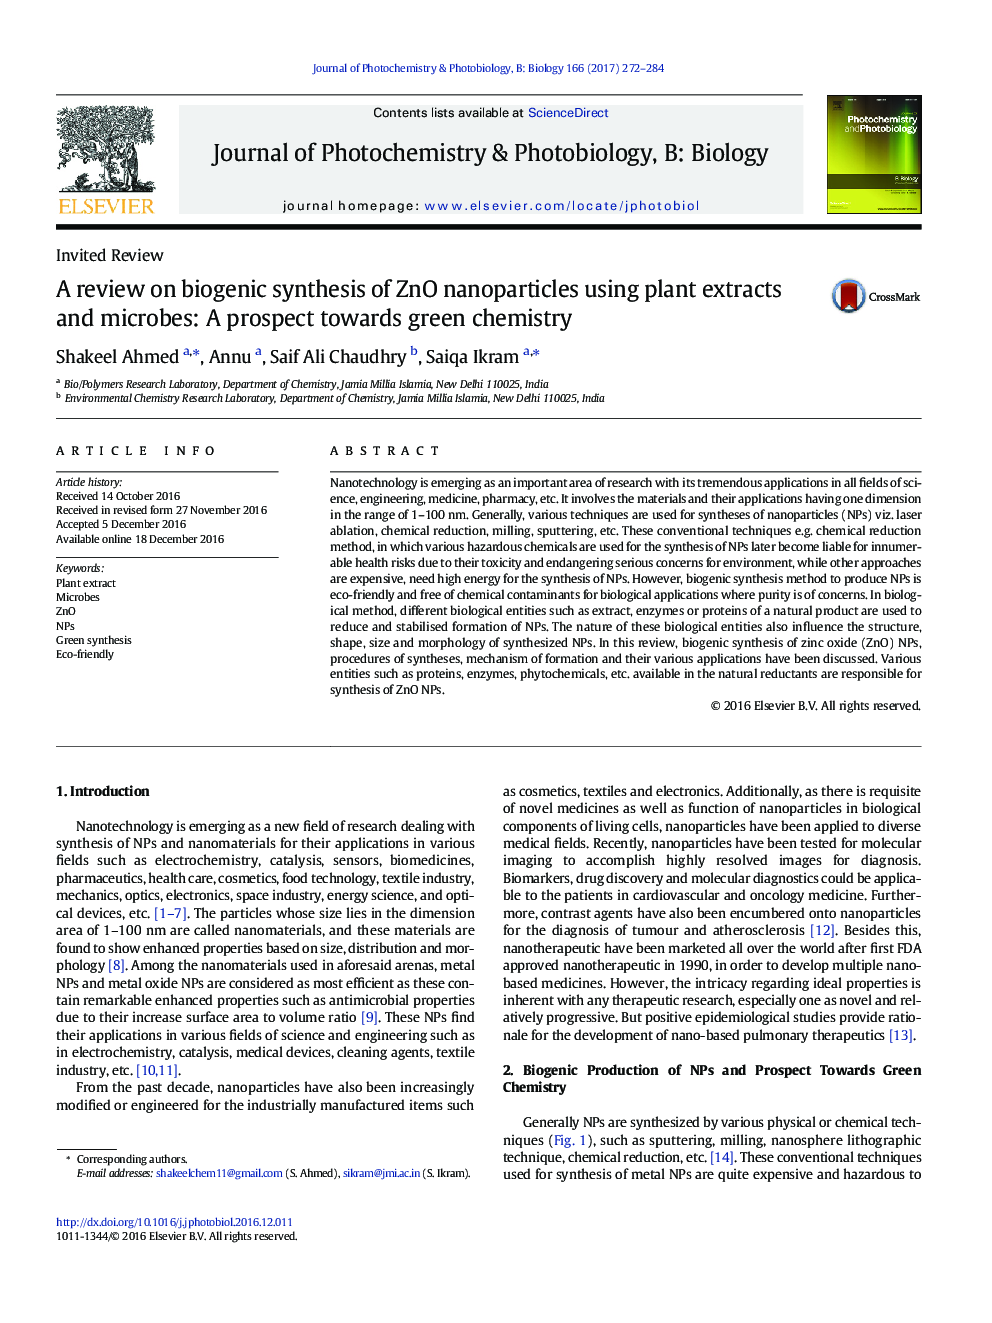 Invited ReviewA review on biogenic synthesis of ZnO nanoparticles using plant extracts and microbes: A prospect towards green chemistry